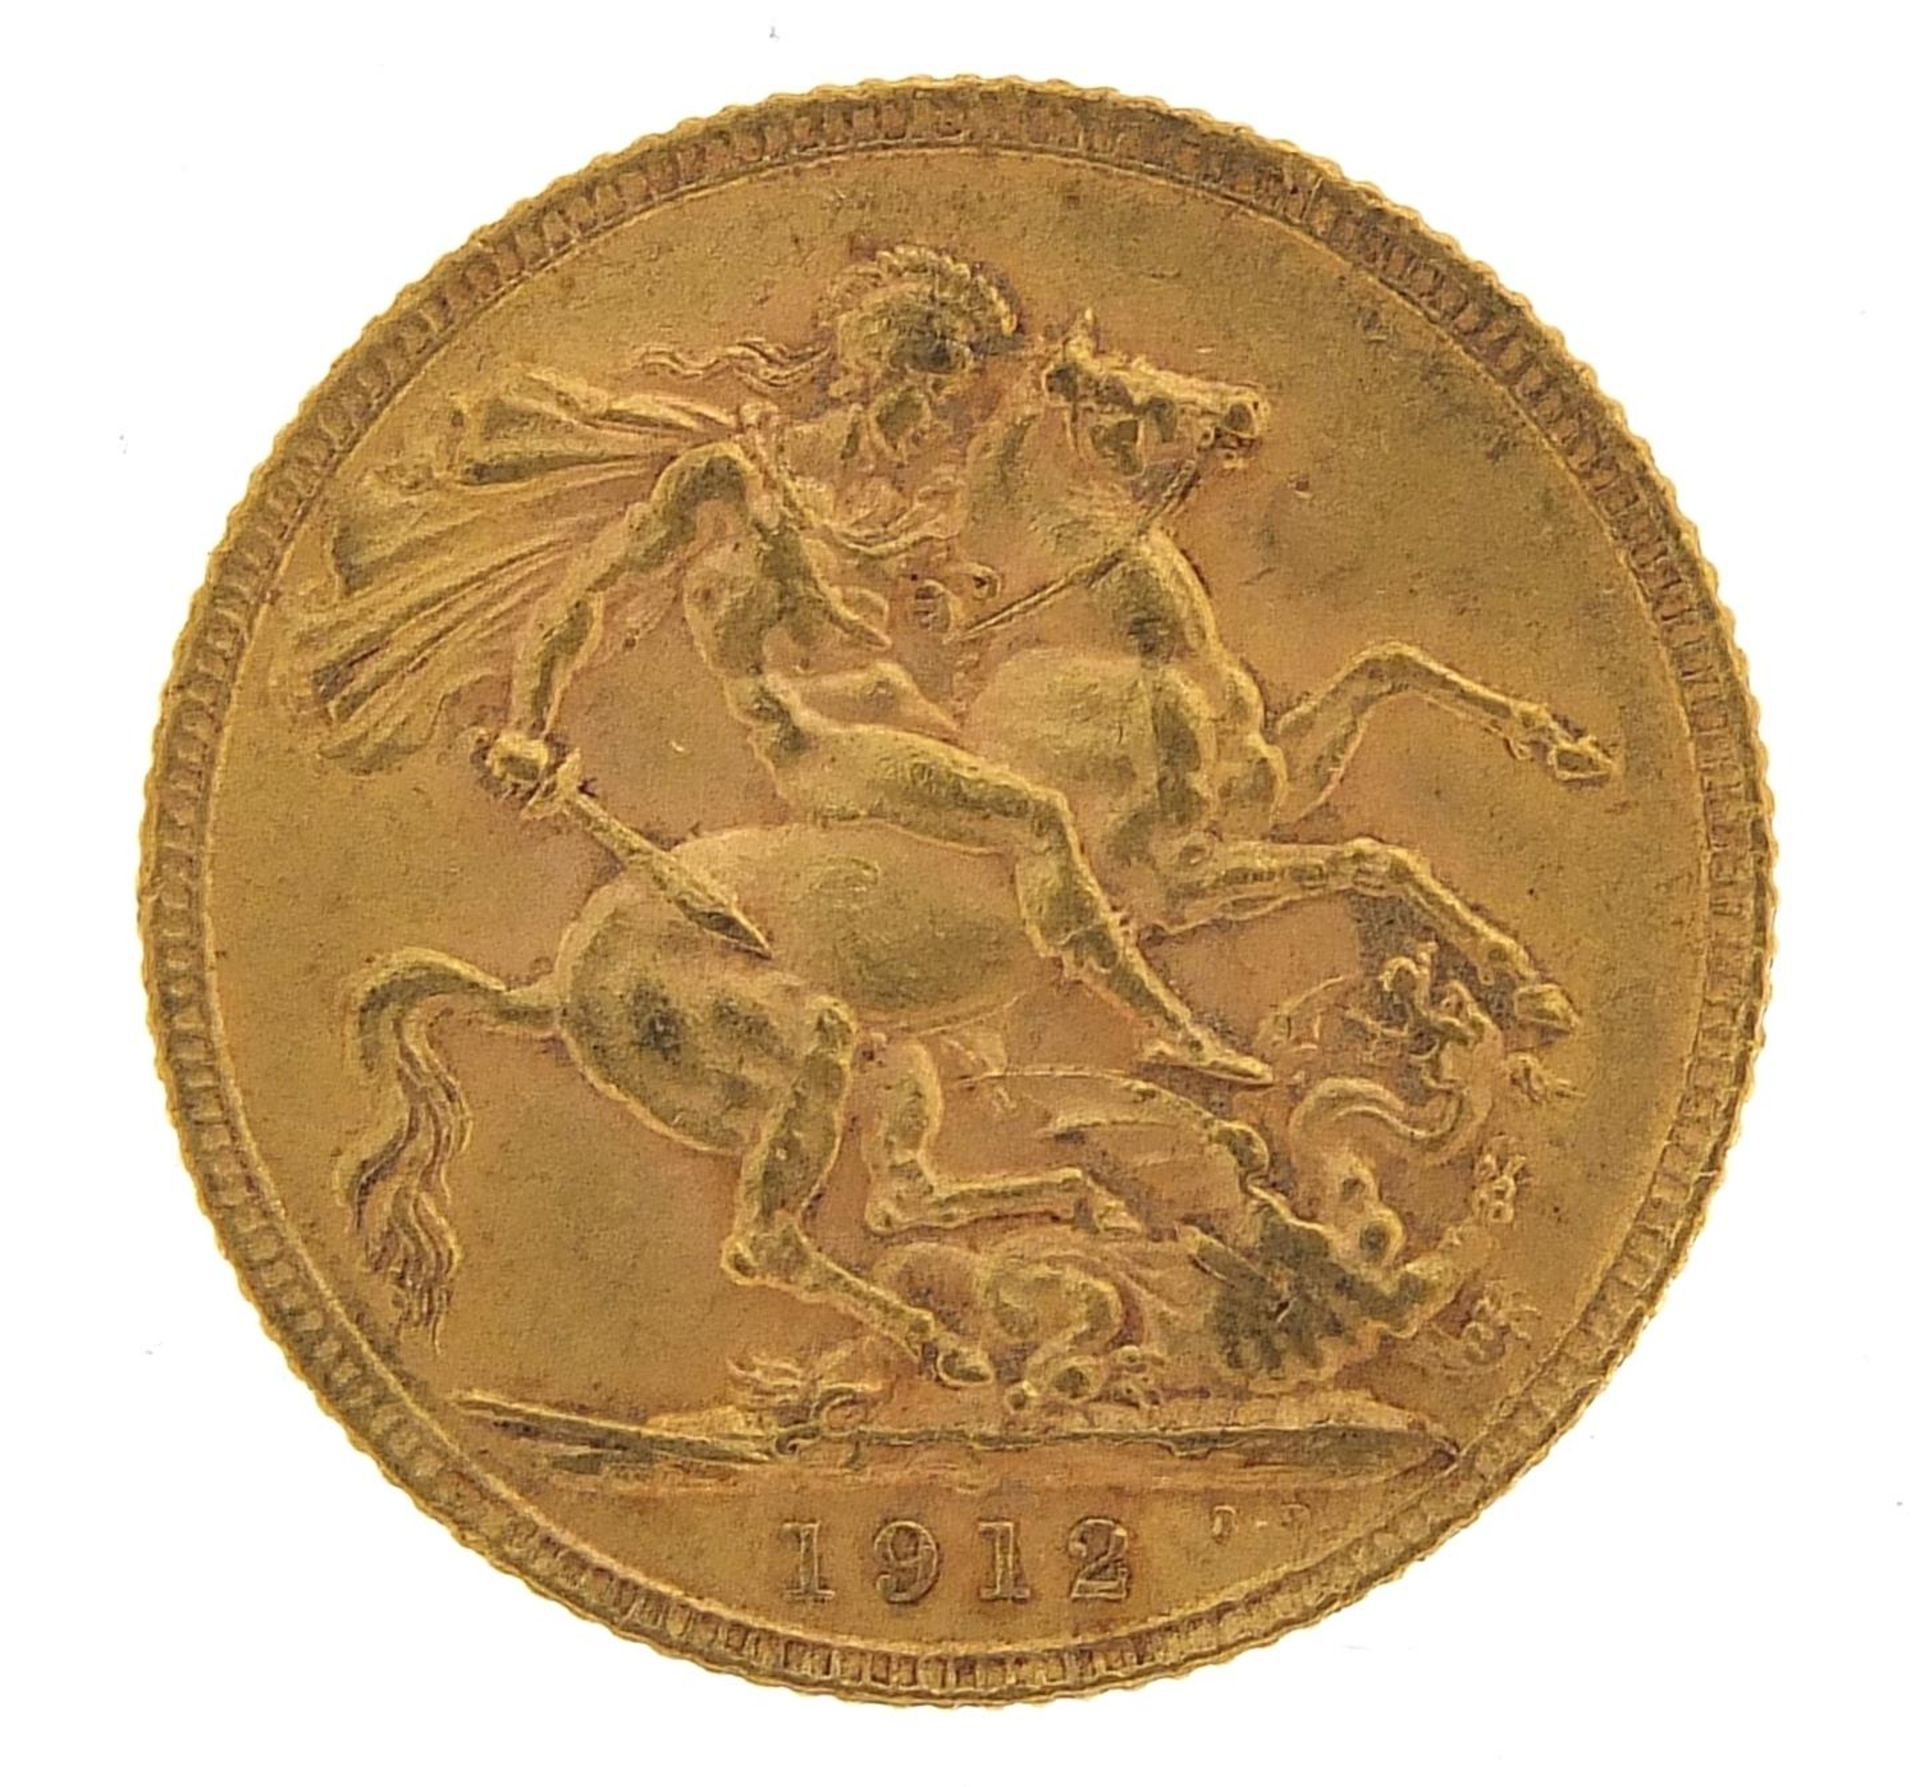 George V 1912 gold sovereign - this lot is sold without buyer's premium